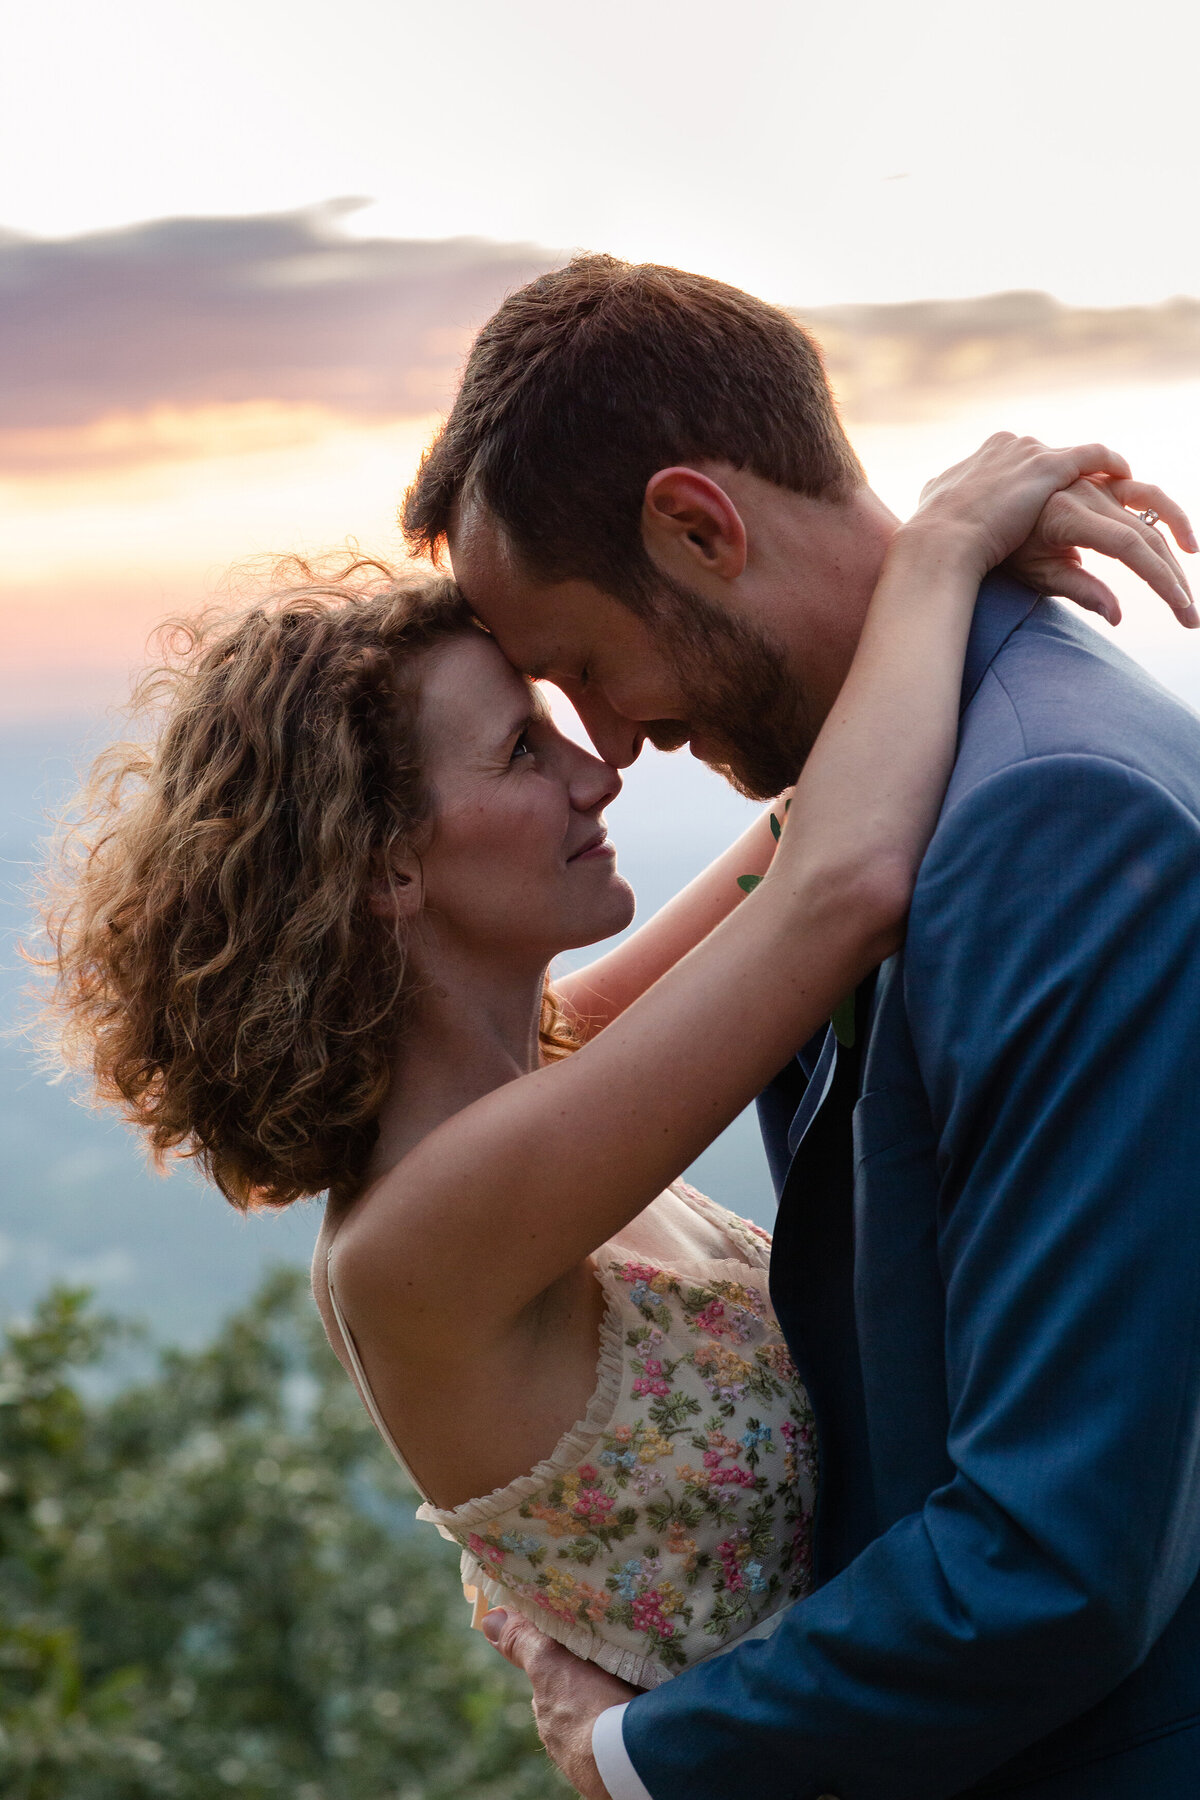 A romantic sunset shoot during a 10 year anniversary renewal of vows on Cheaha Mountain in Delta, Alabama.